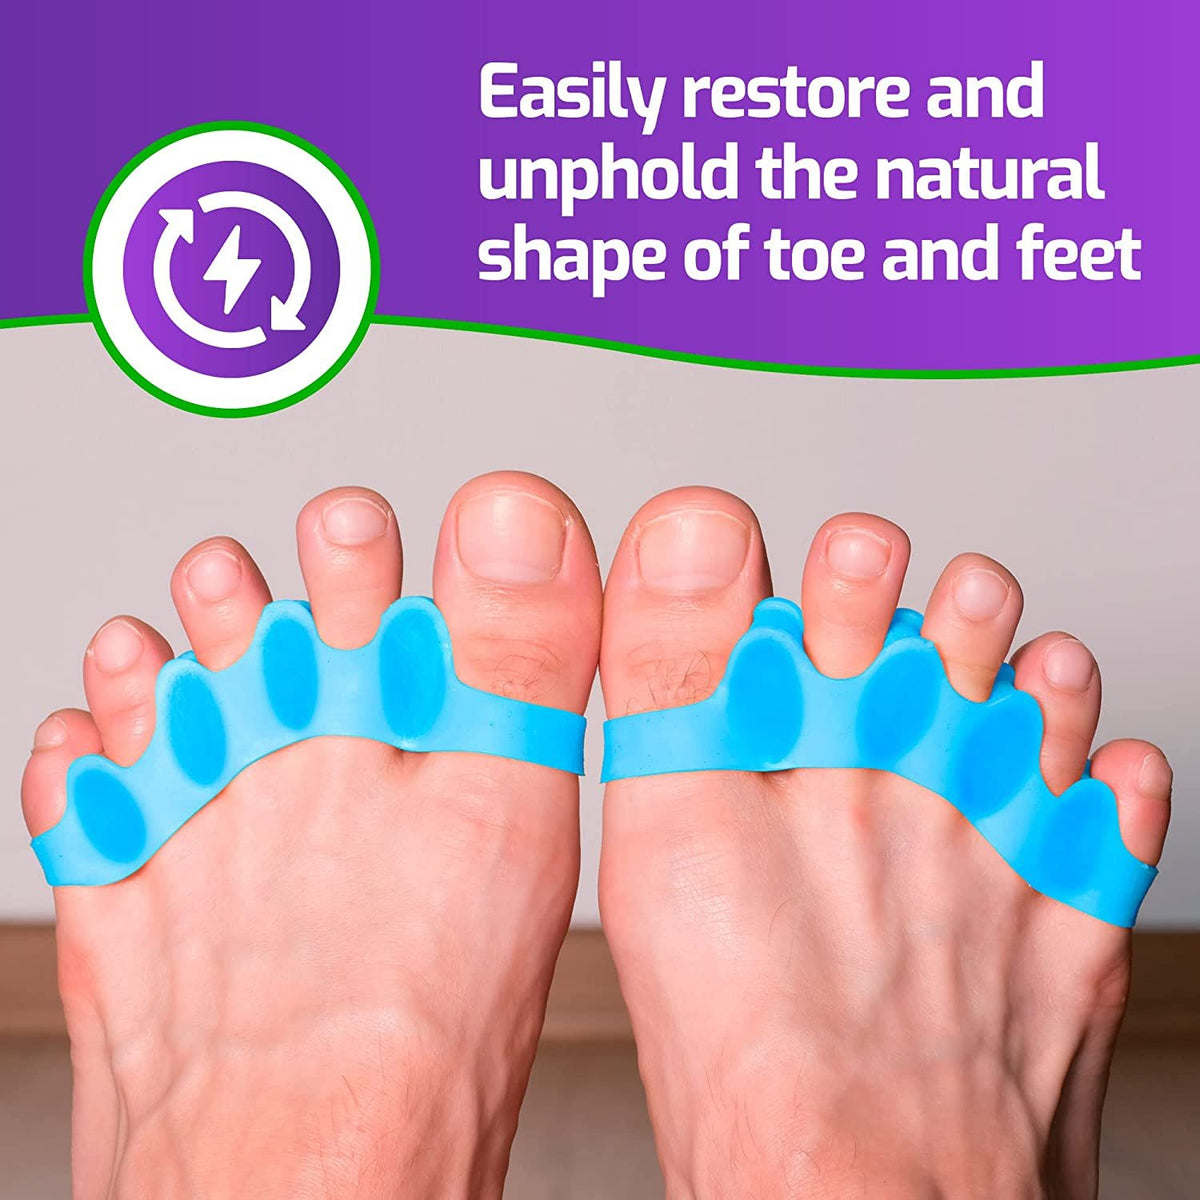 Mars Wellness Gel Toe Separators - Universal Toe Spreaders Straighteners to Relieve Foot Pain, Fix Overlapping Toes & Correct Bunions - Toe Spacers are Comfortable to Wear with Shoes - 2 Pairs